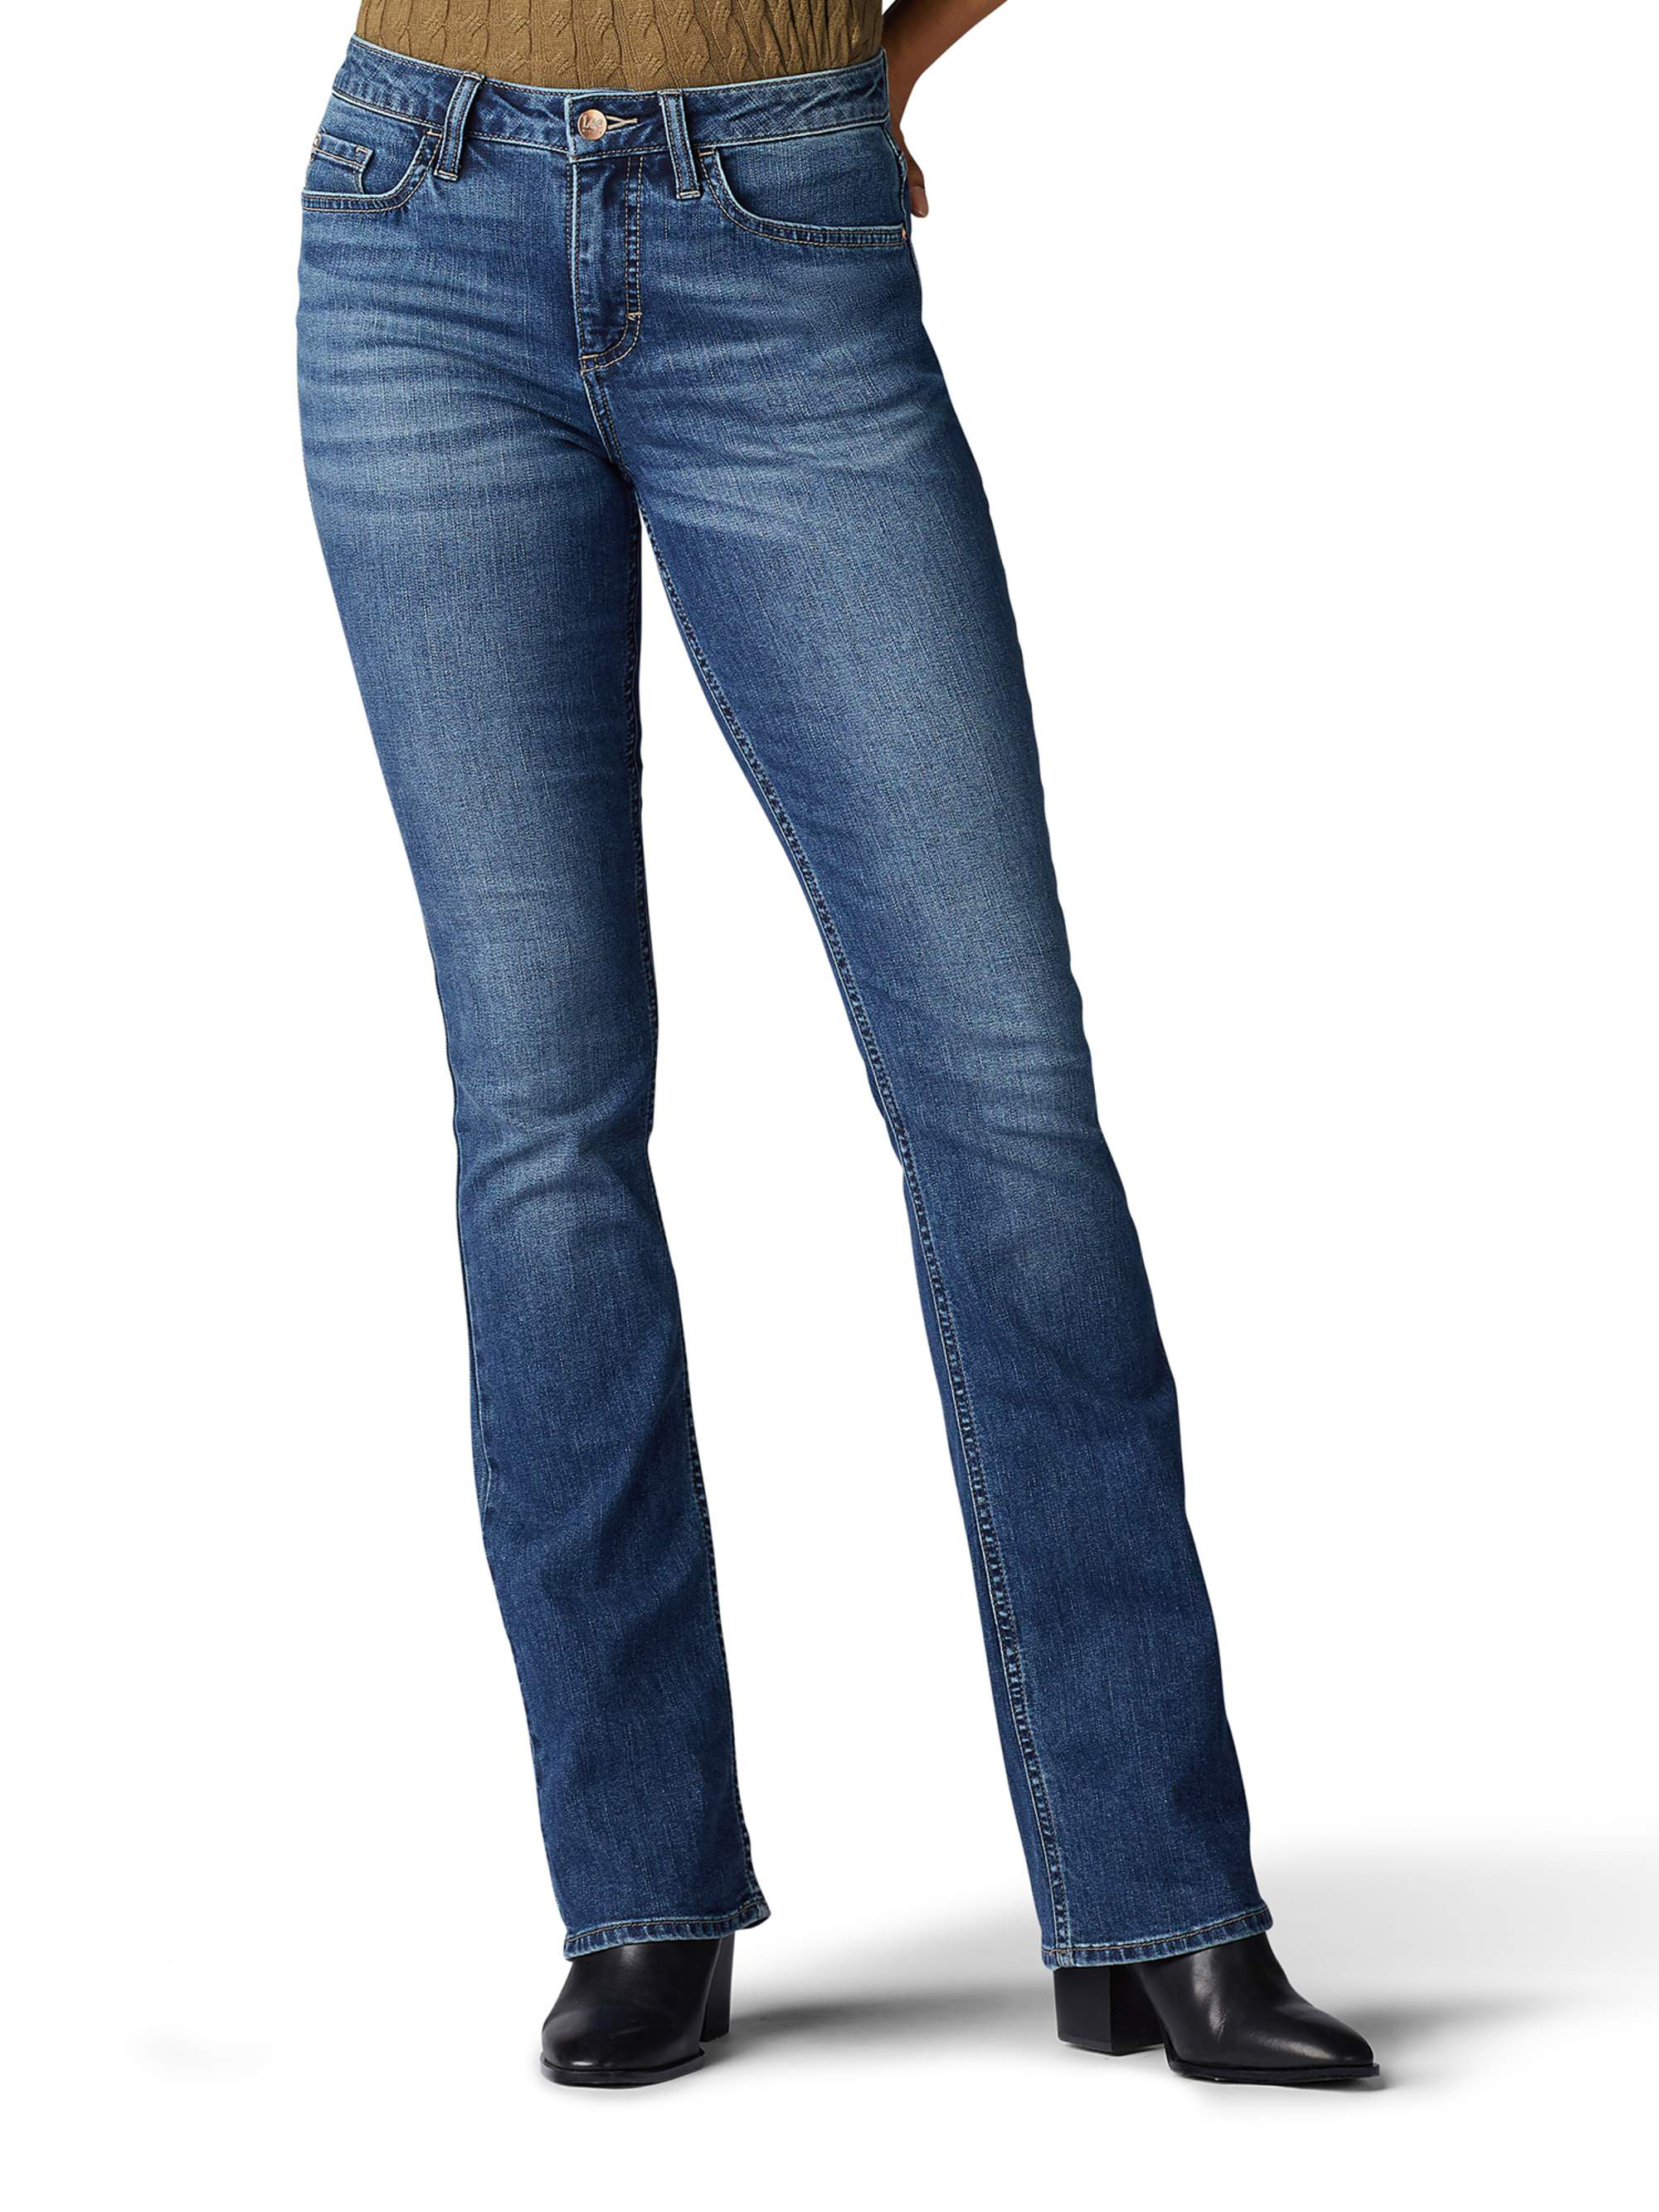 Lee Riders Women's Midrise Bootcut Jean - image 1 of 5